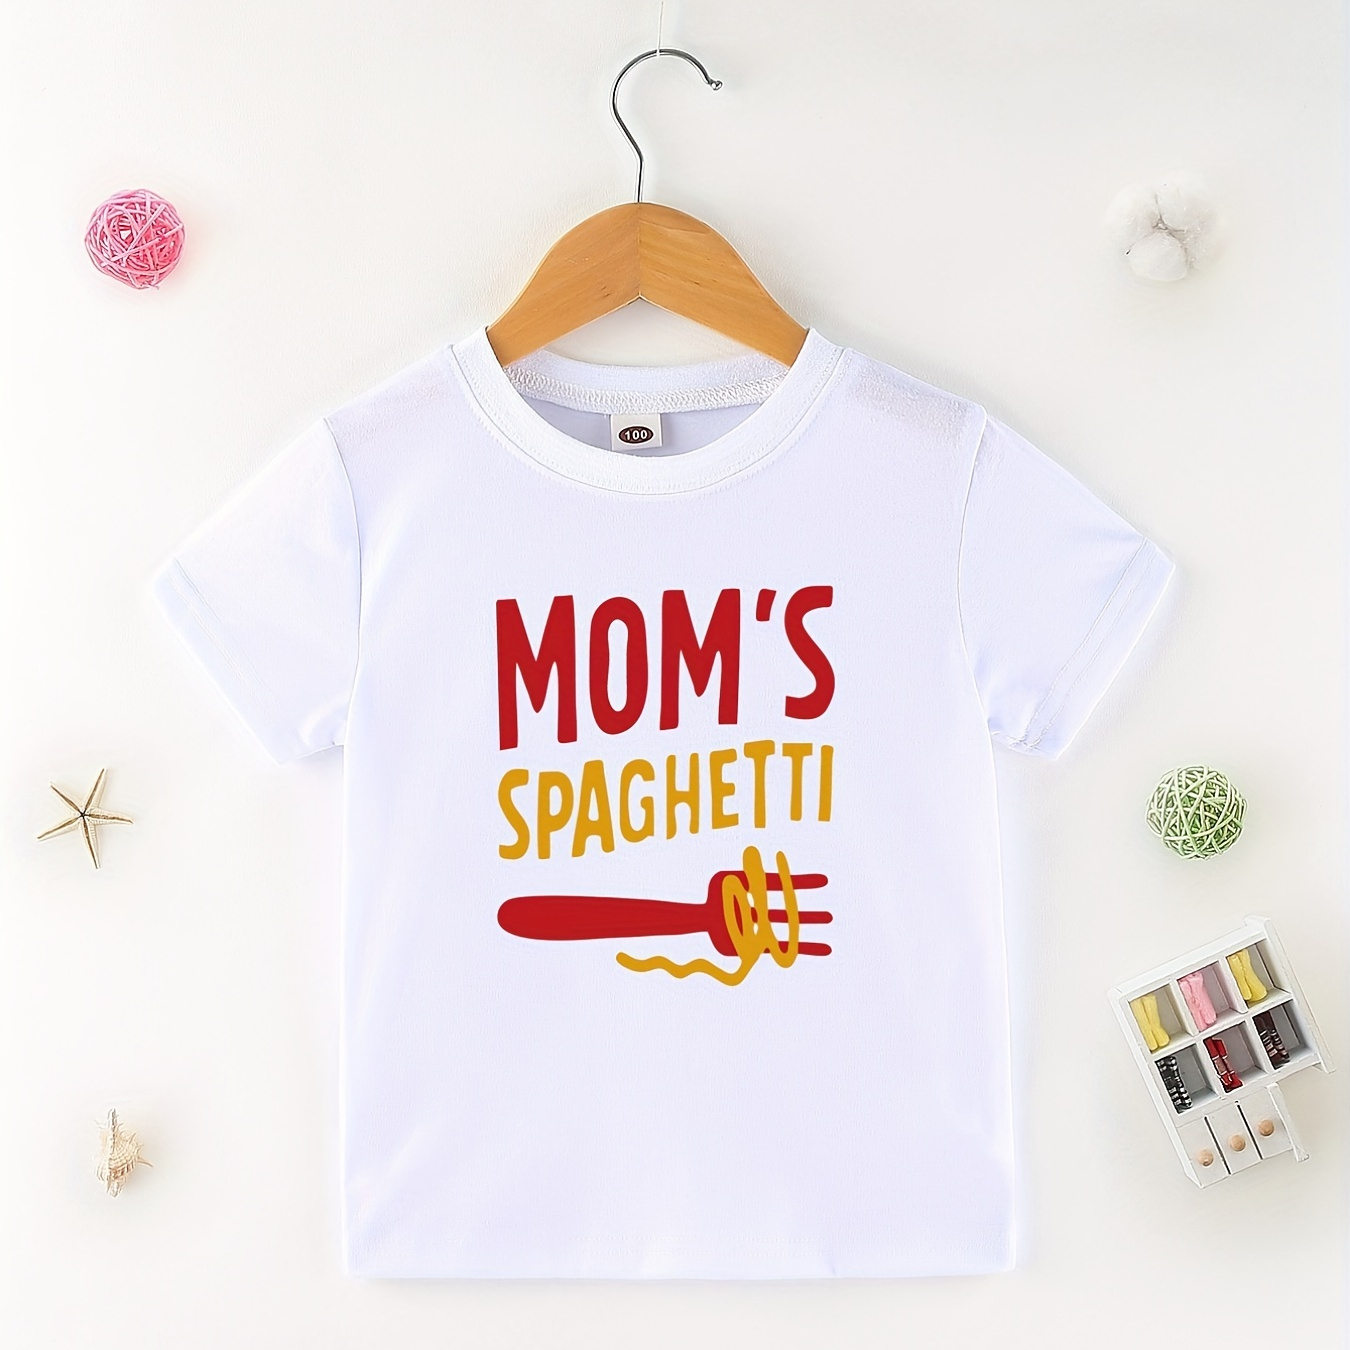 

Mama's Spaghetti Letter Print Boys Creative T-shirt, Casual Lightweight Comfy Short Sleeve Tee Tops, Kids Clothings For Summer